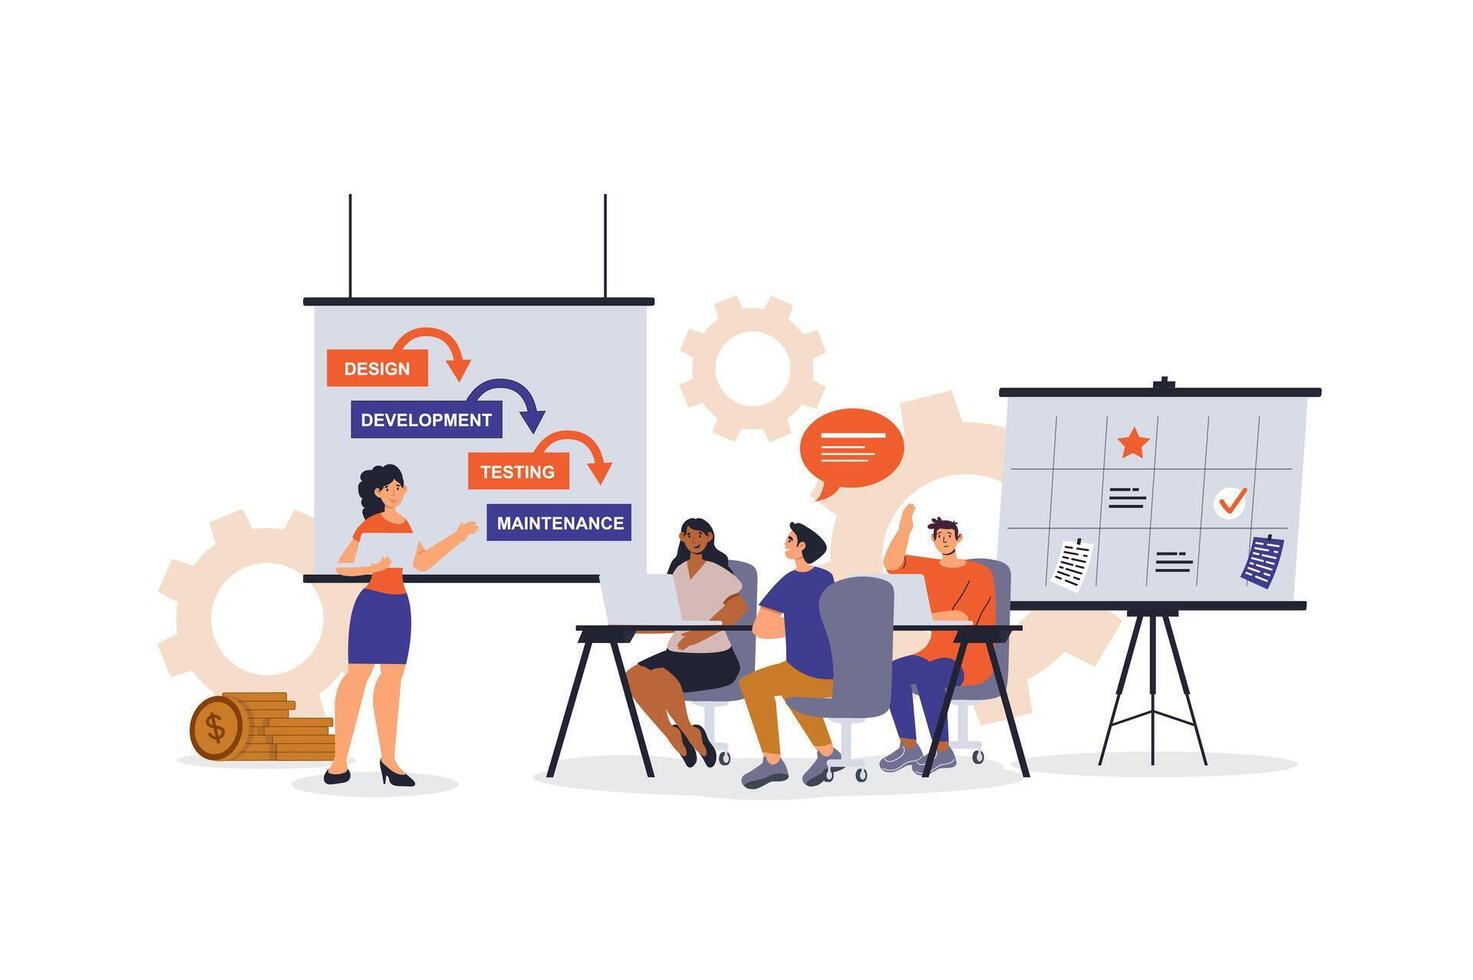 Project management concept with character scene for web. Women and men developing and planning tasks and stage checklist. People situation in flat design. Vector illustration for marketing material.